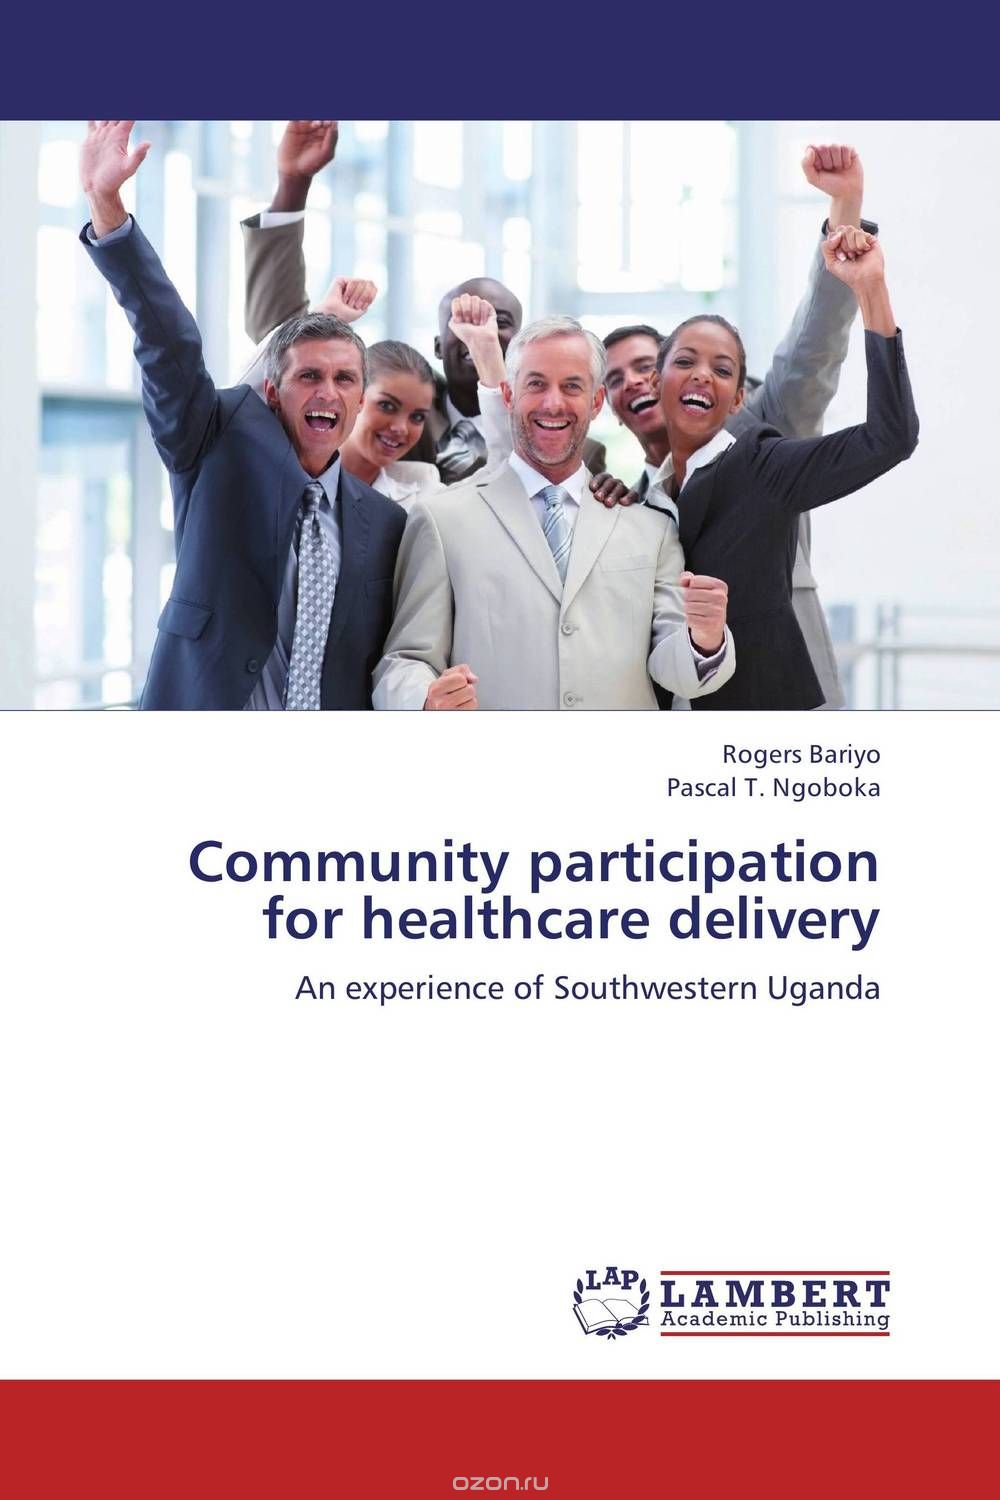 Community participation for healthcare delivery